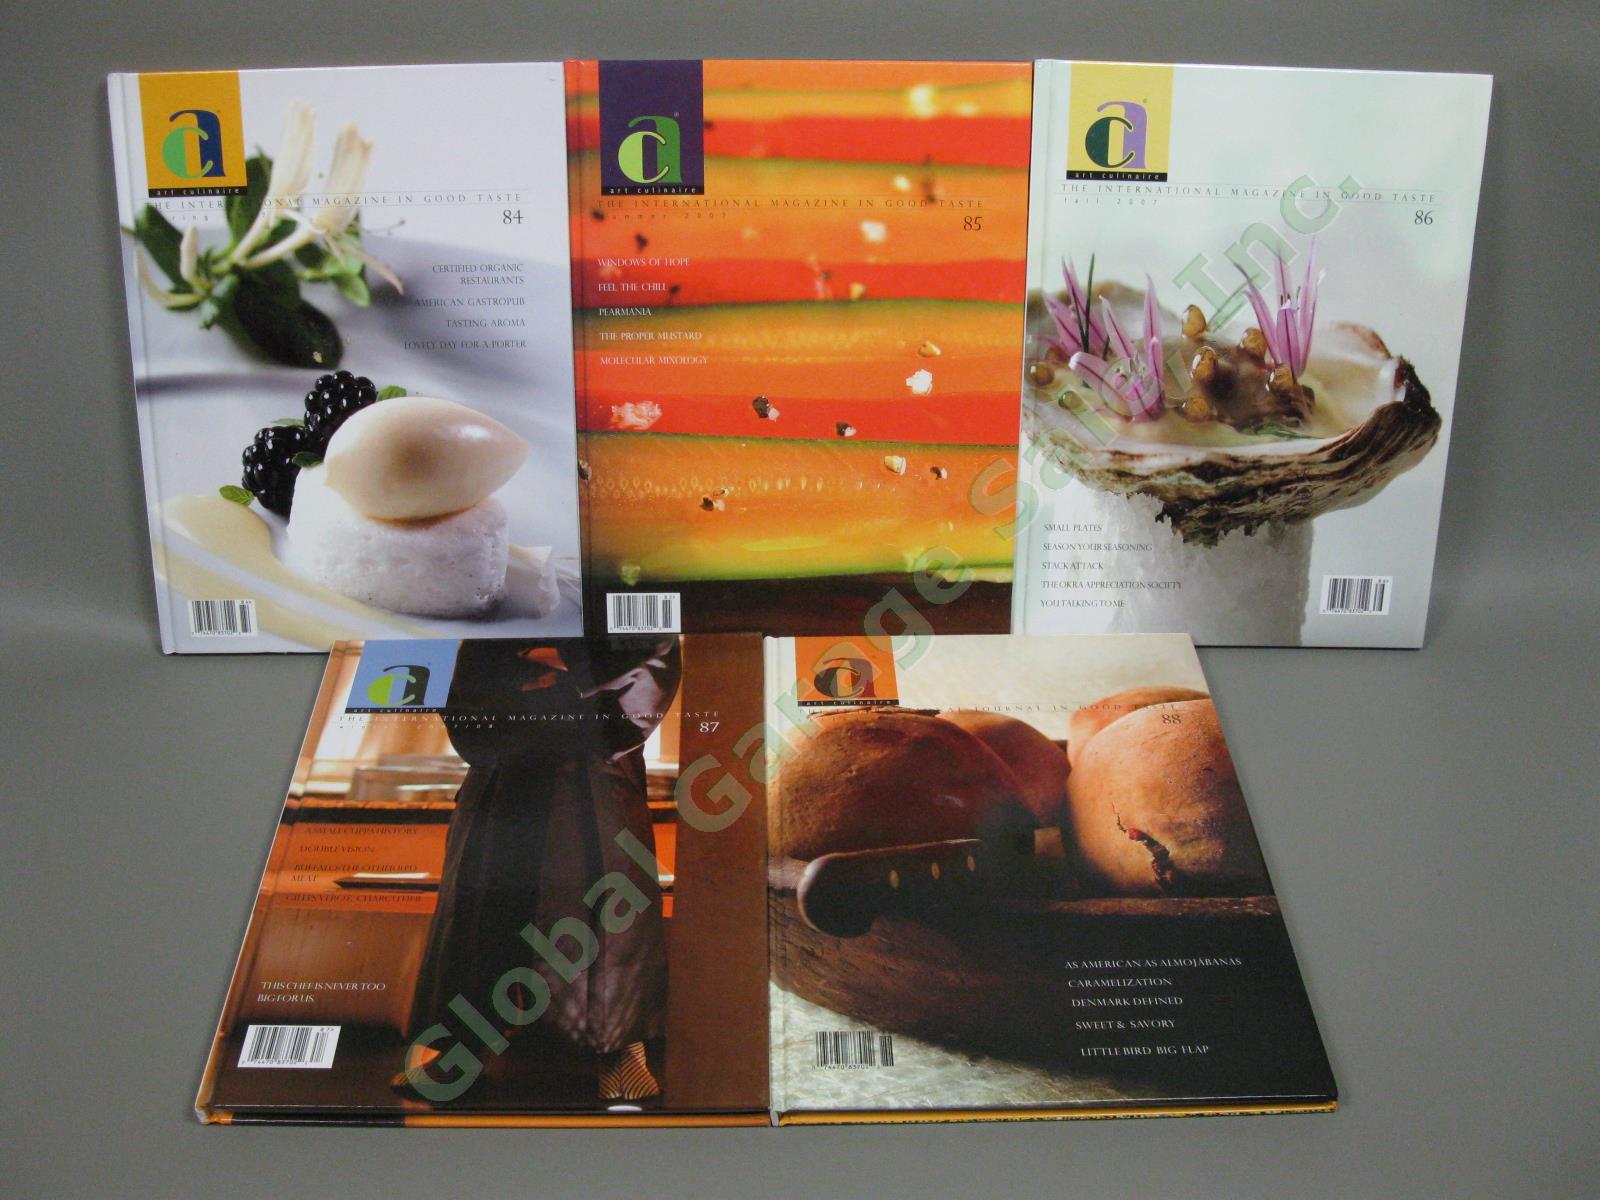 Art Culinaire 2002-2009 International Magazine Collection 31 Issues 64-94 Lot NR 5